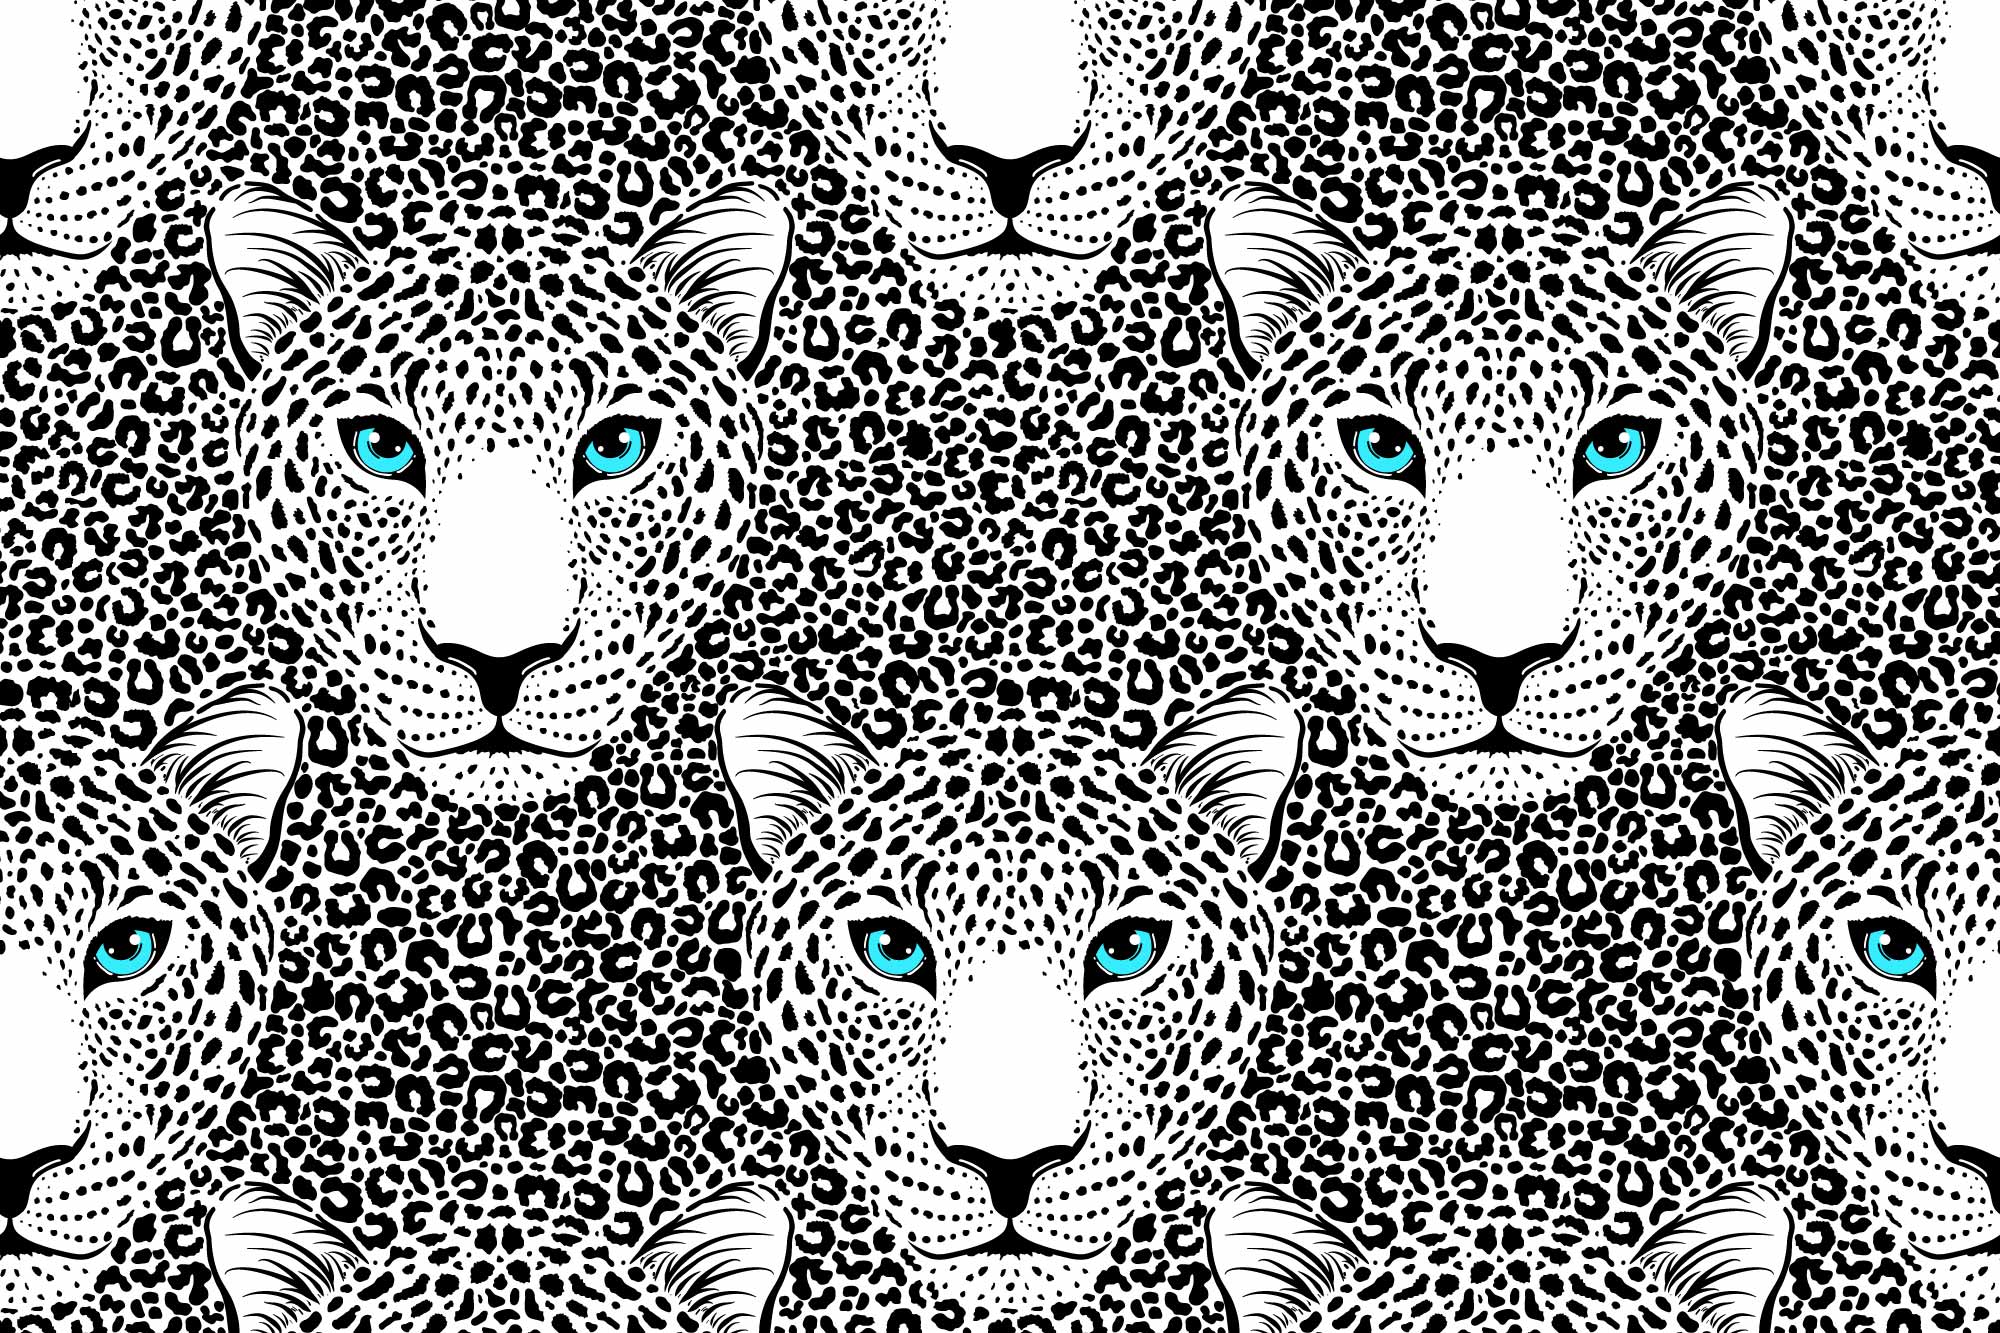 Black and white leopard pattern with blue eyes.